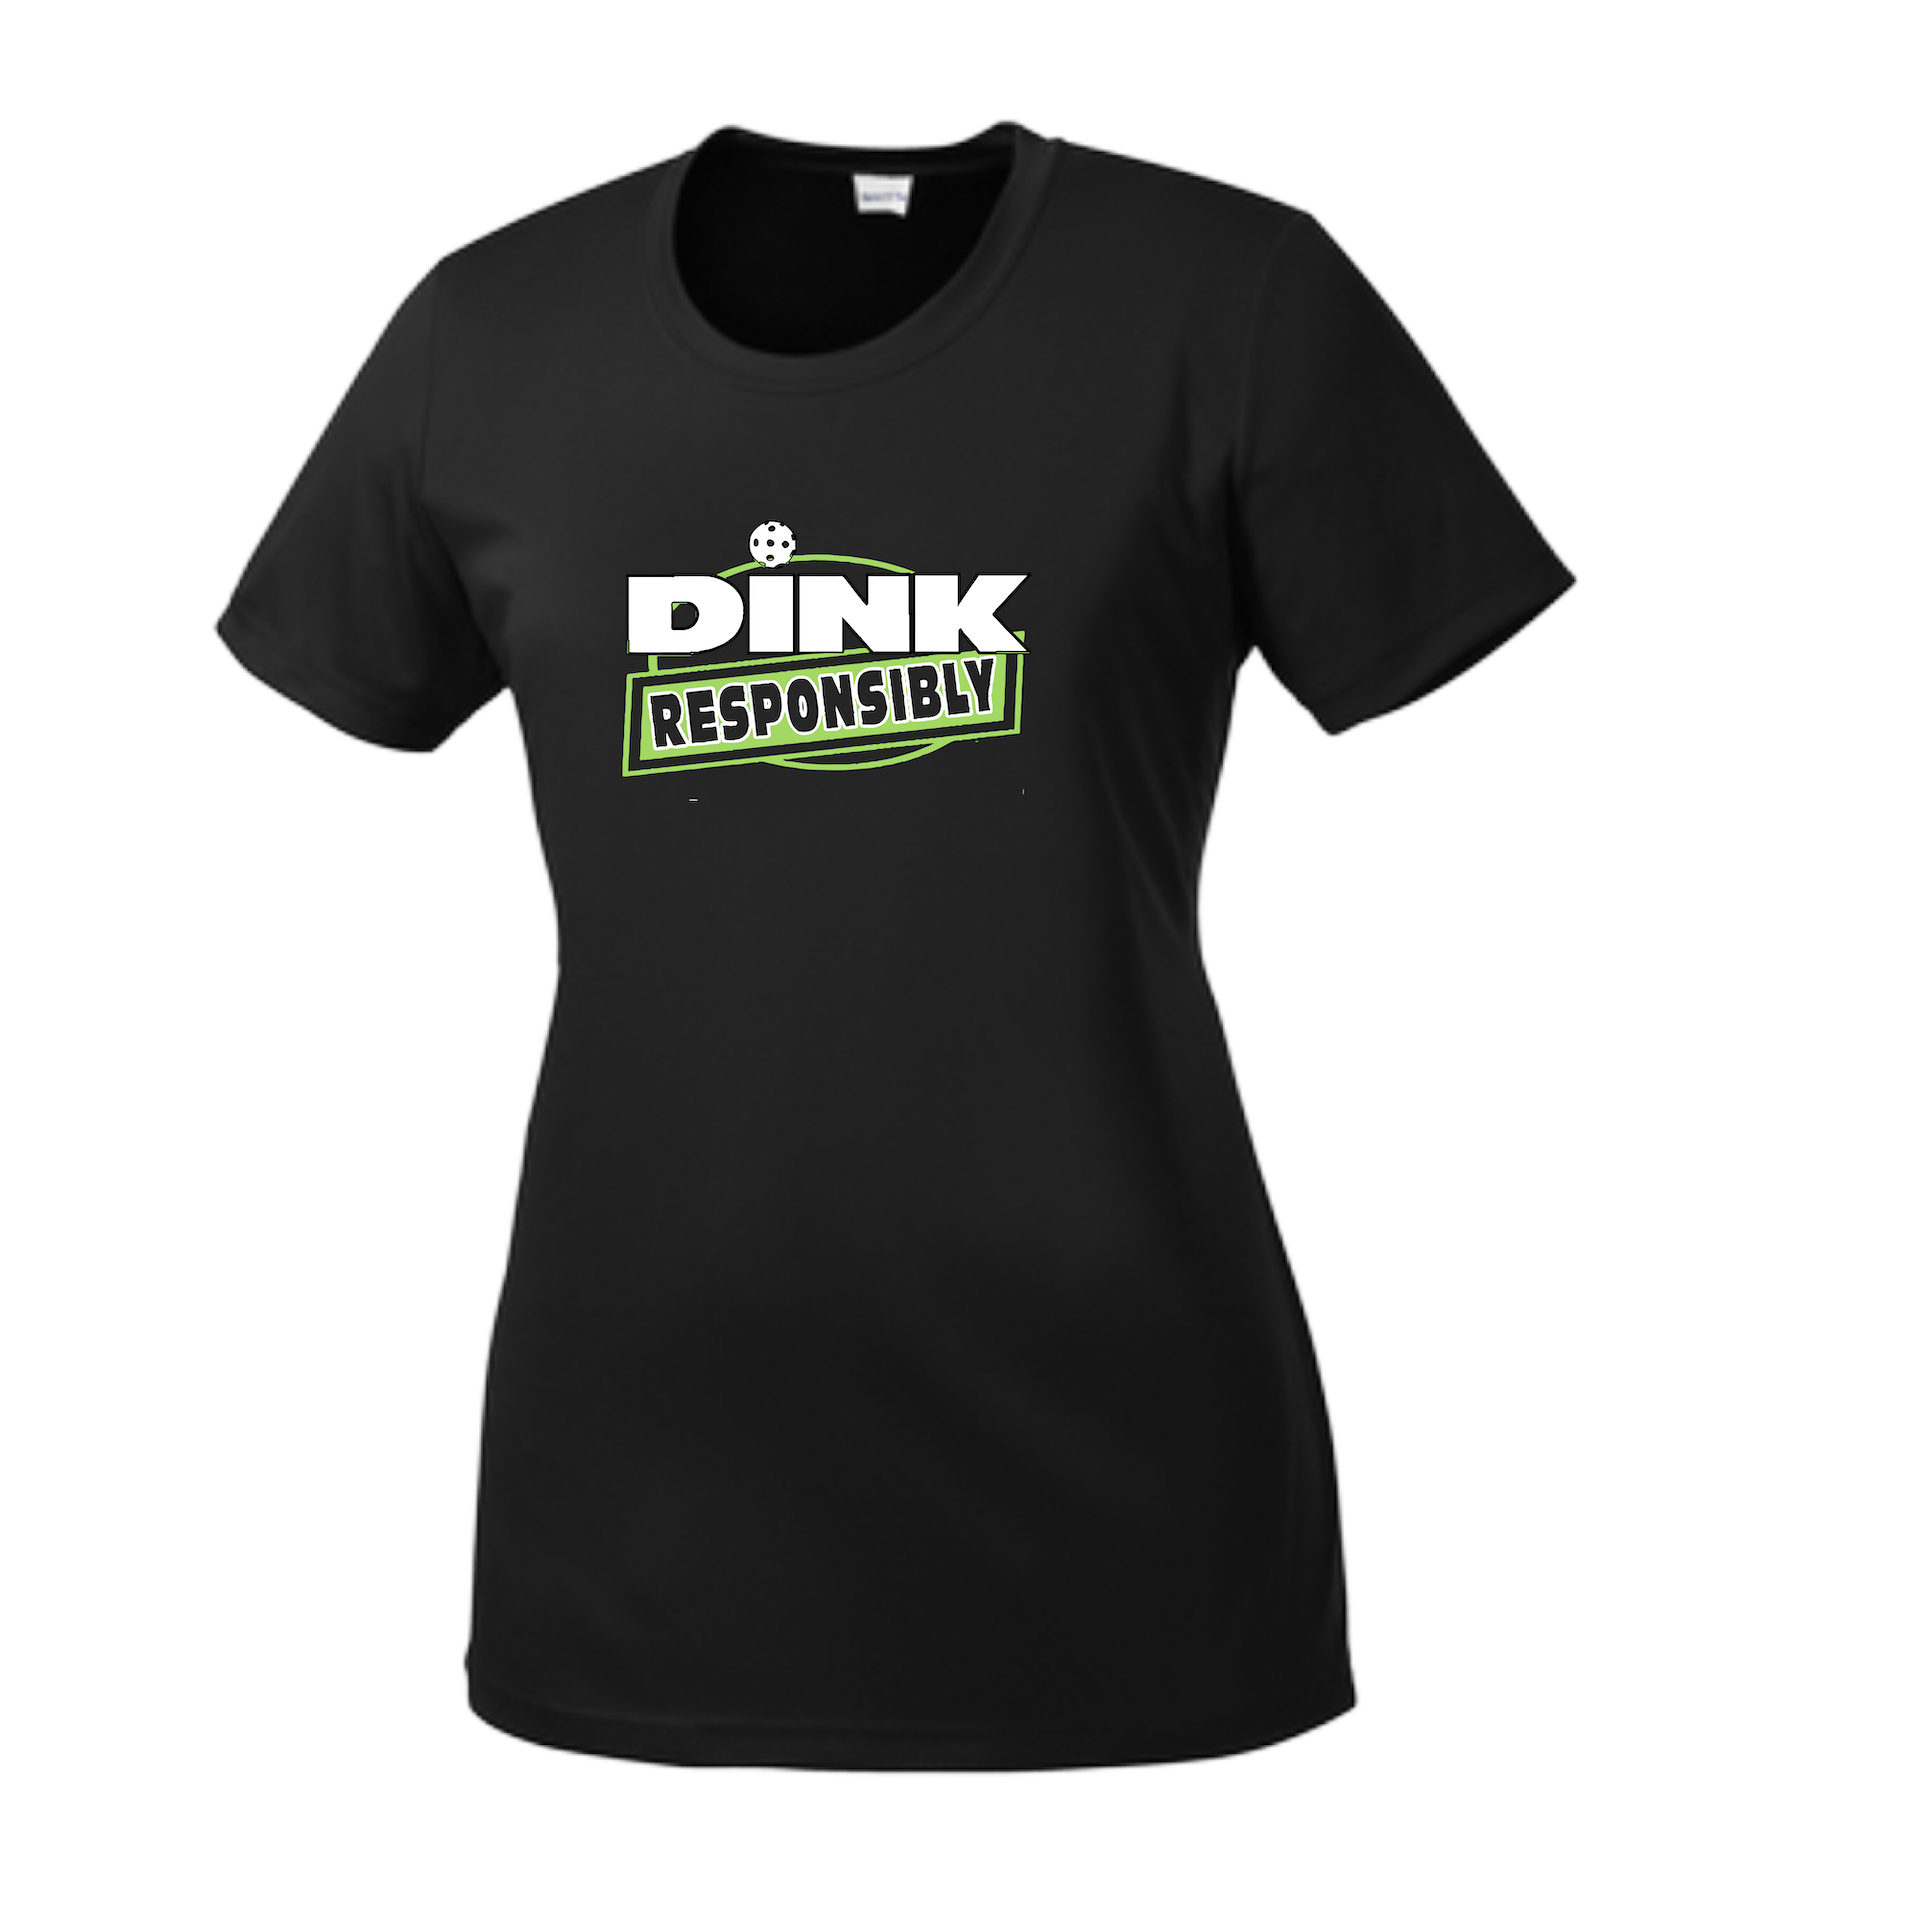 Pickleball Design: Dink Responsibly  Women's Style:  Short-Sleeve Crew-Neck  Shirts are lightweight, roomy and highly breathable. These moisture-wicking shirts are designed for athletic performance. They feature PosiCharge technology to lock in color and prevent logos from fading. Removable tag and set-in sleeves for comfort.